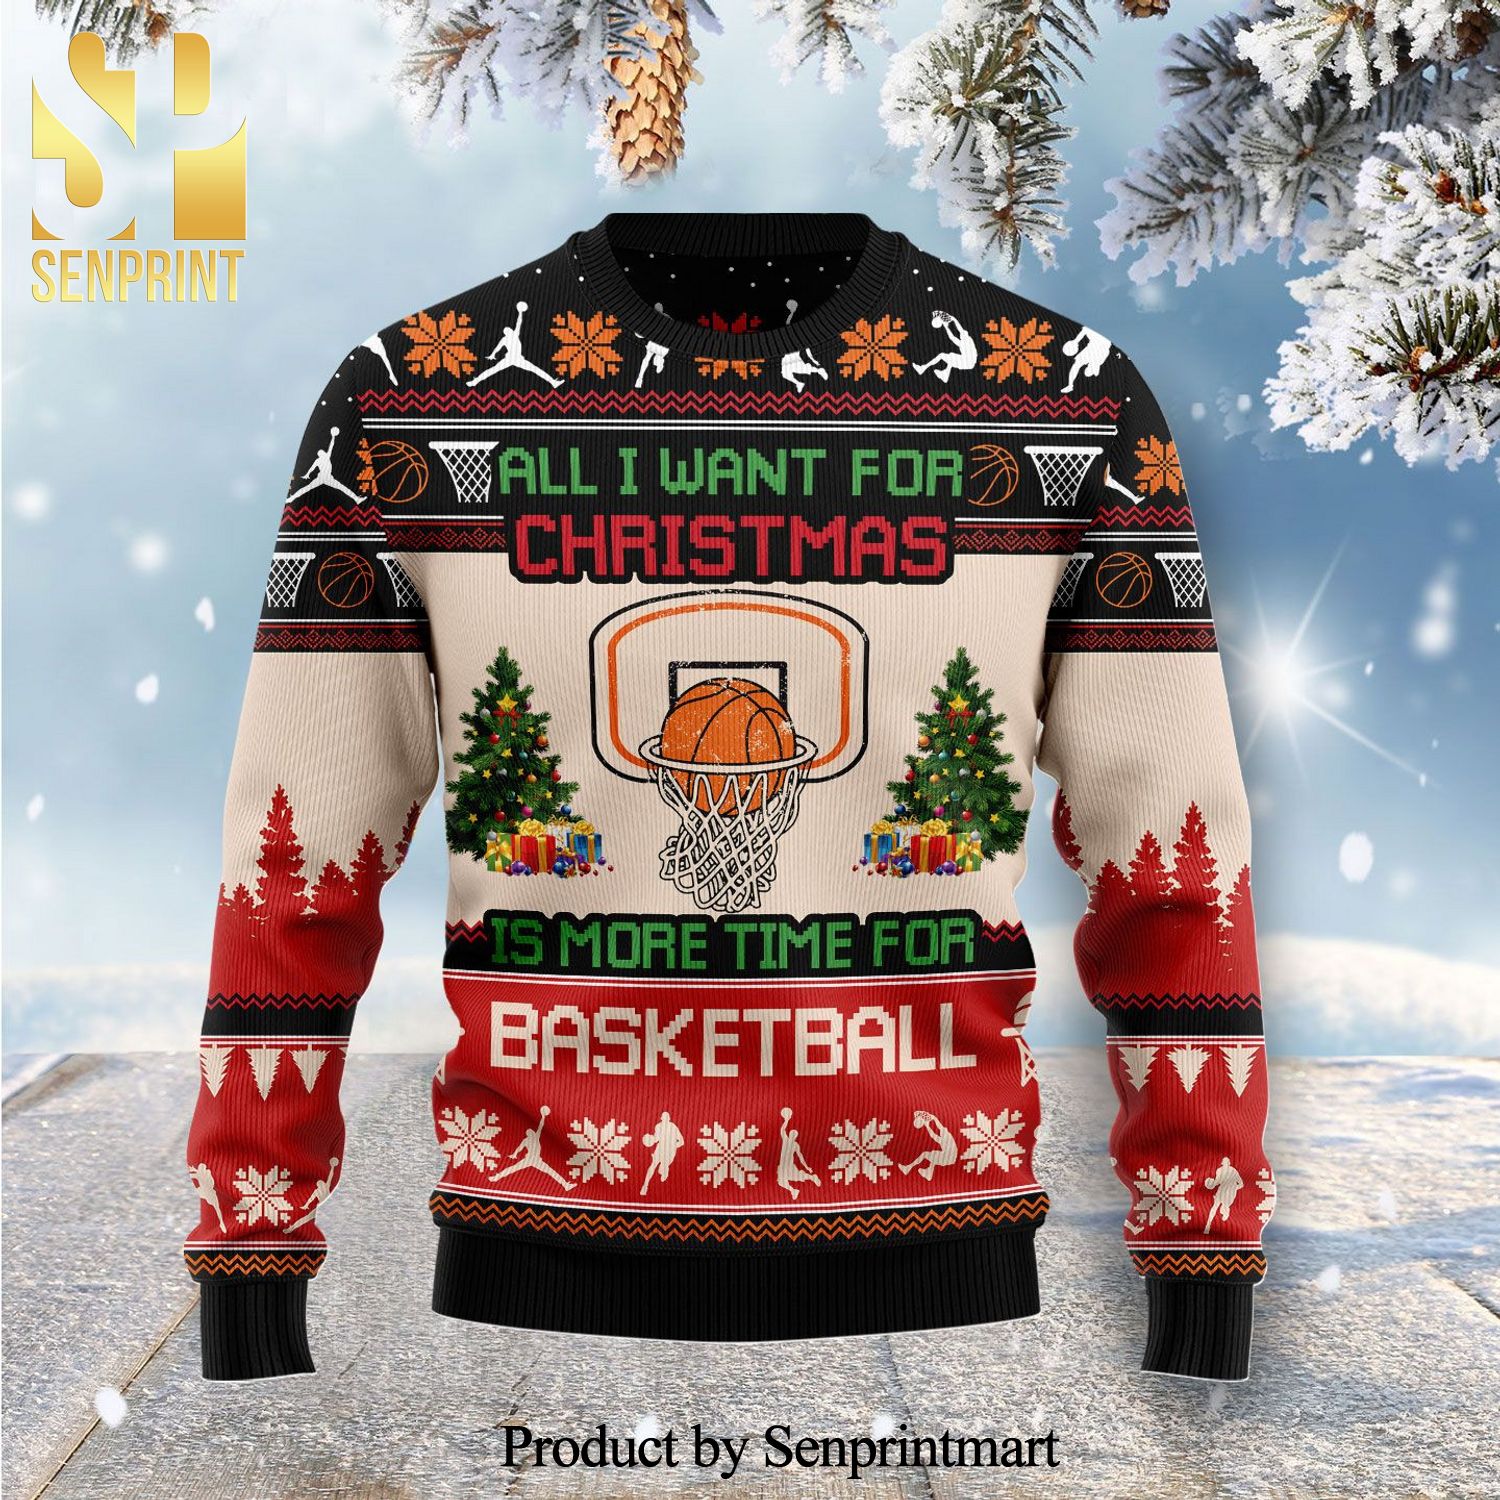 All I Want For Christmas Is More Time For Basketball Knitted Ugly Christmas Sweater